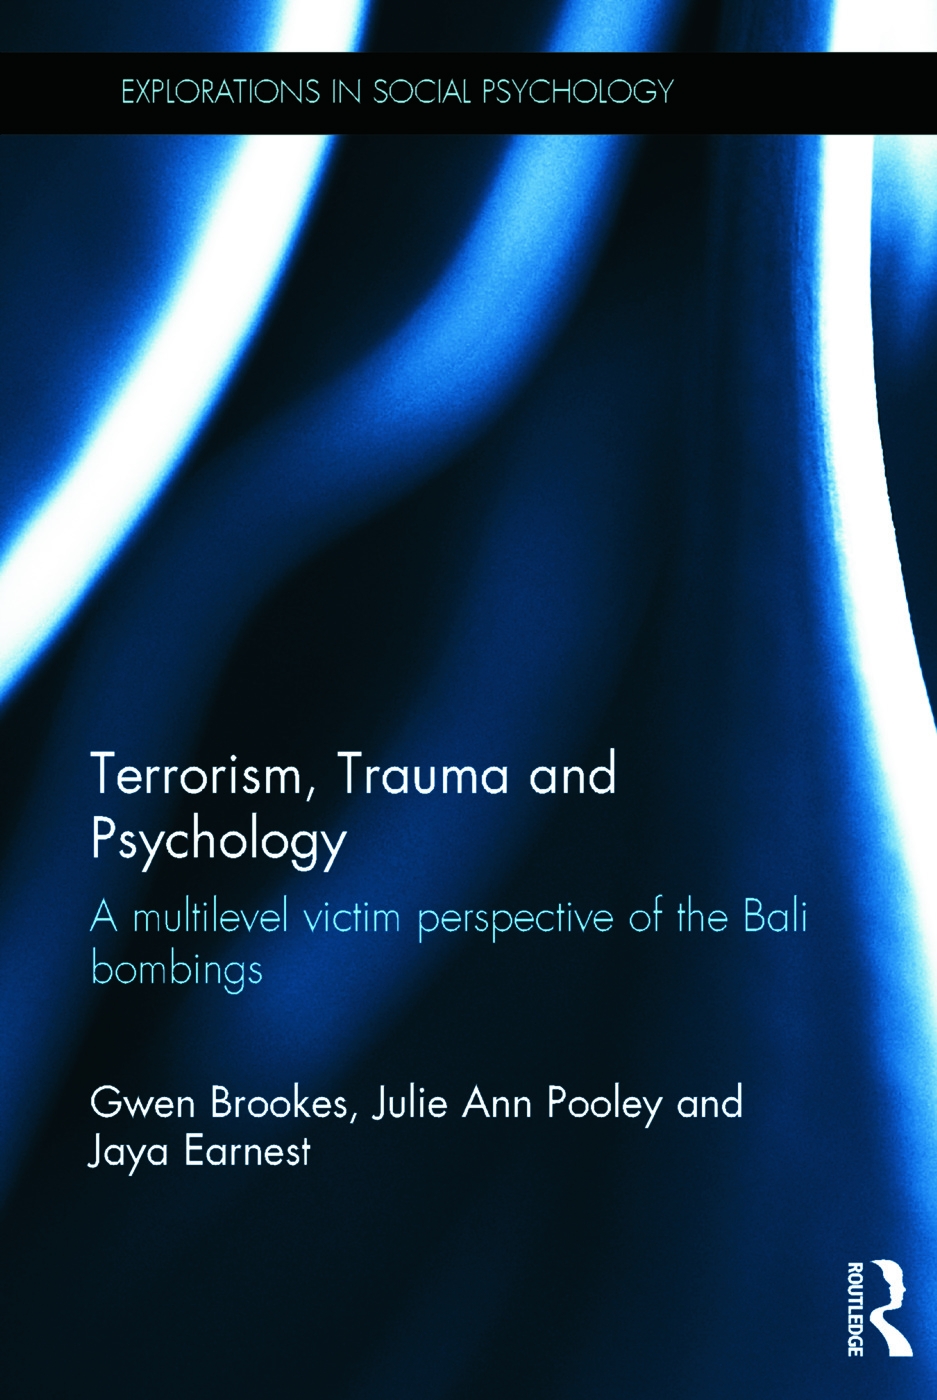 Terrorism, Trauma and Psychology: A Multilevel Victim Perspective of the Bali Bombings